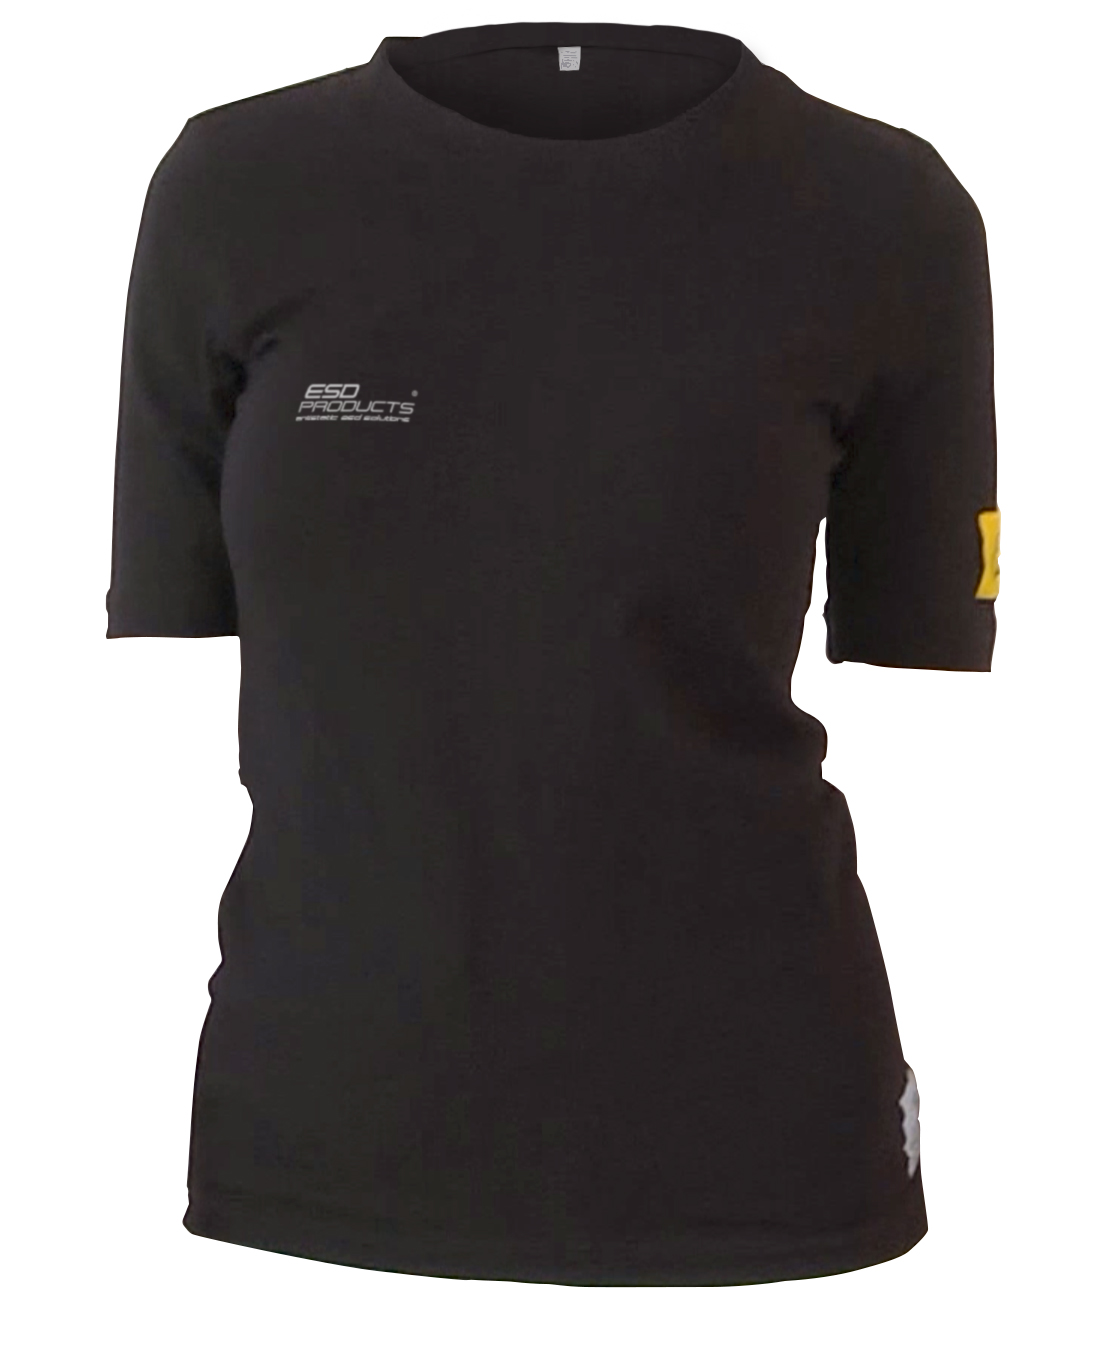 ESD Stretch T-Shirt Woman ATLY Short Sleeve Round Neck ALY20 Fabric Black Unisex XS - 473.ATLY-ALY20